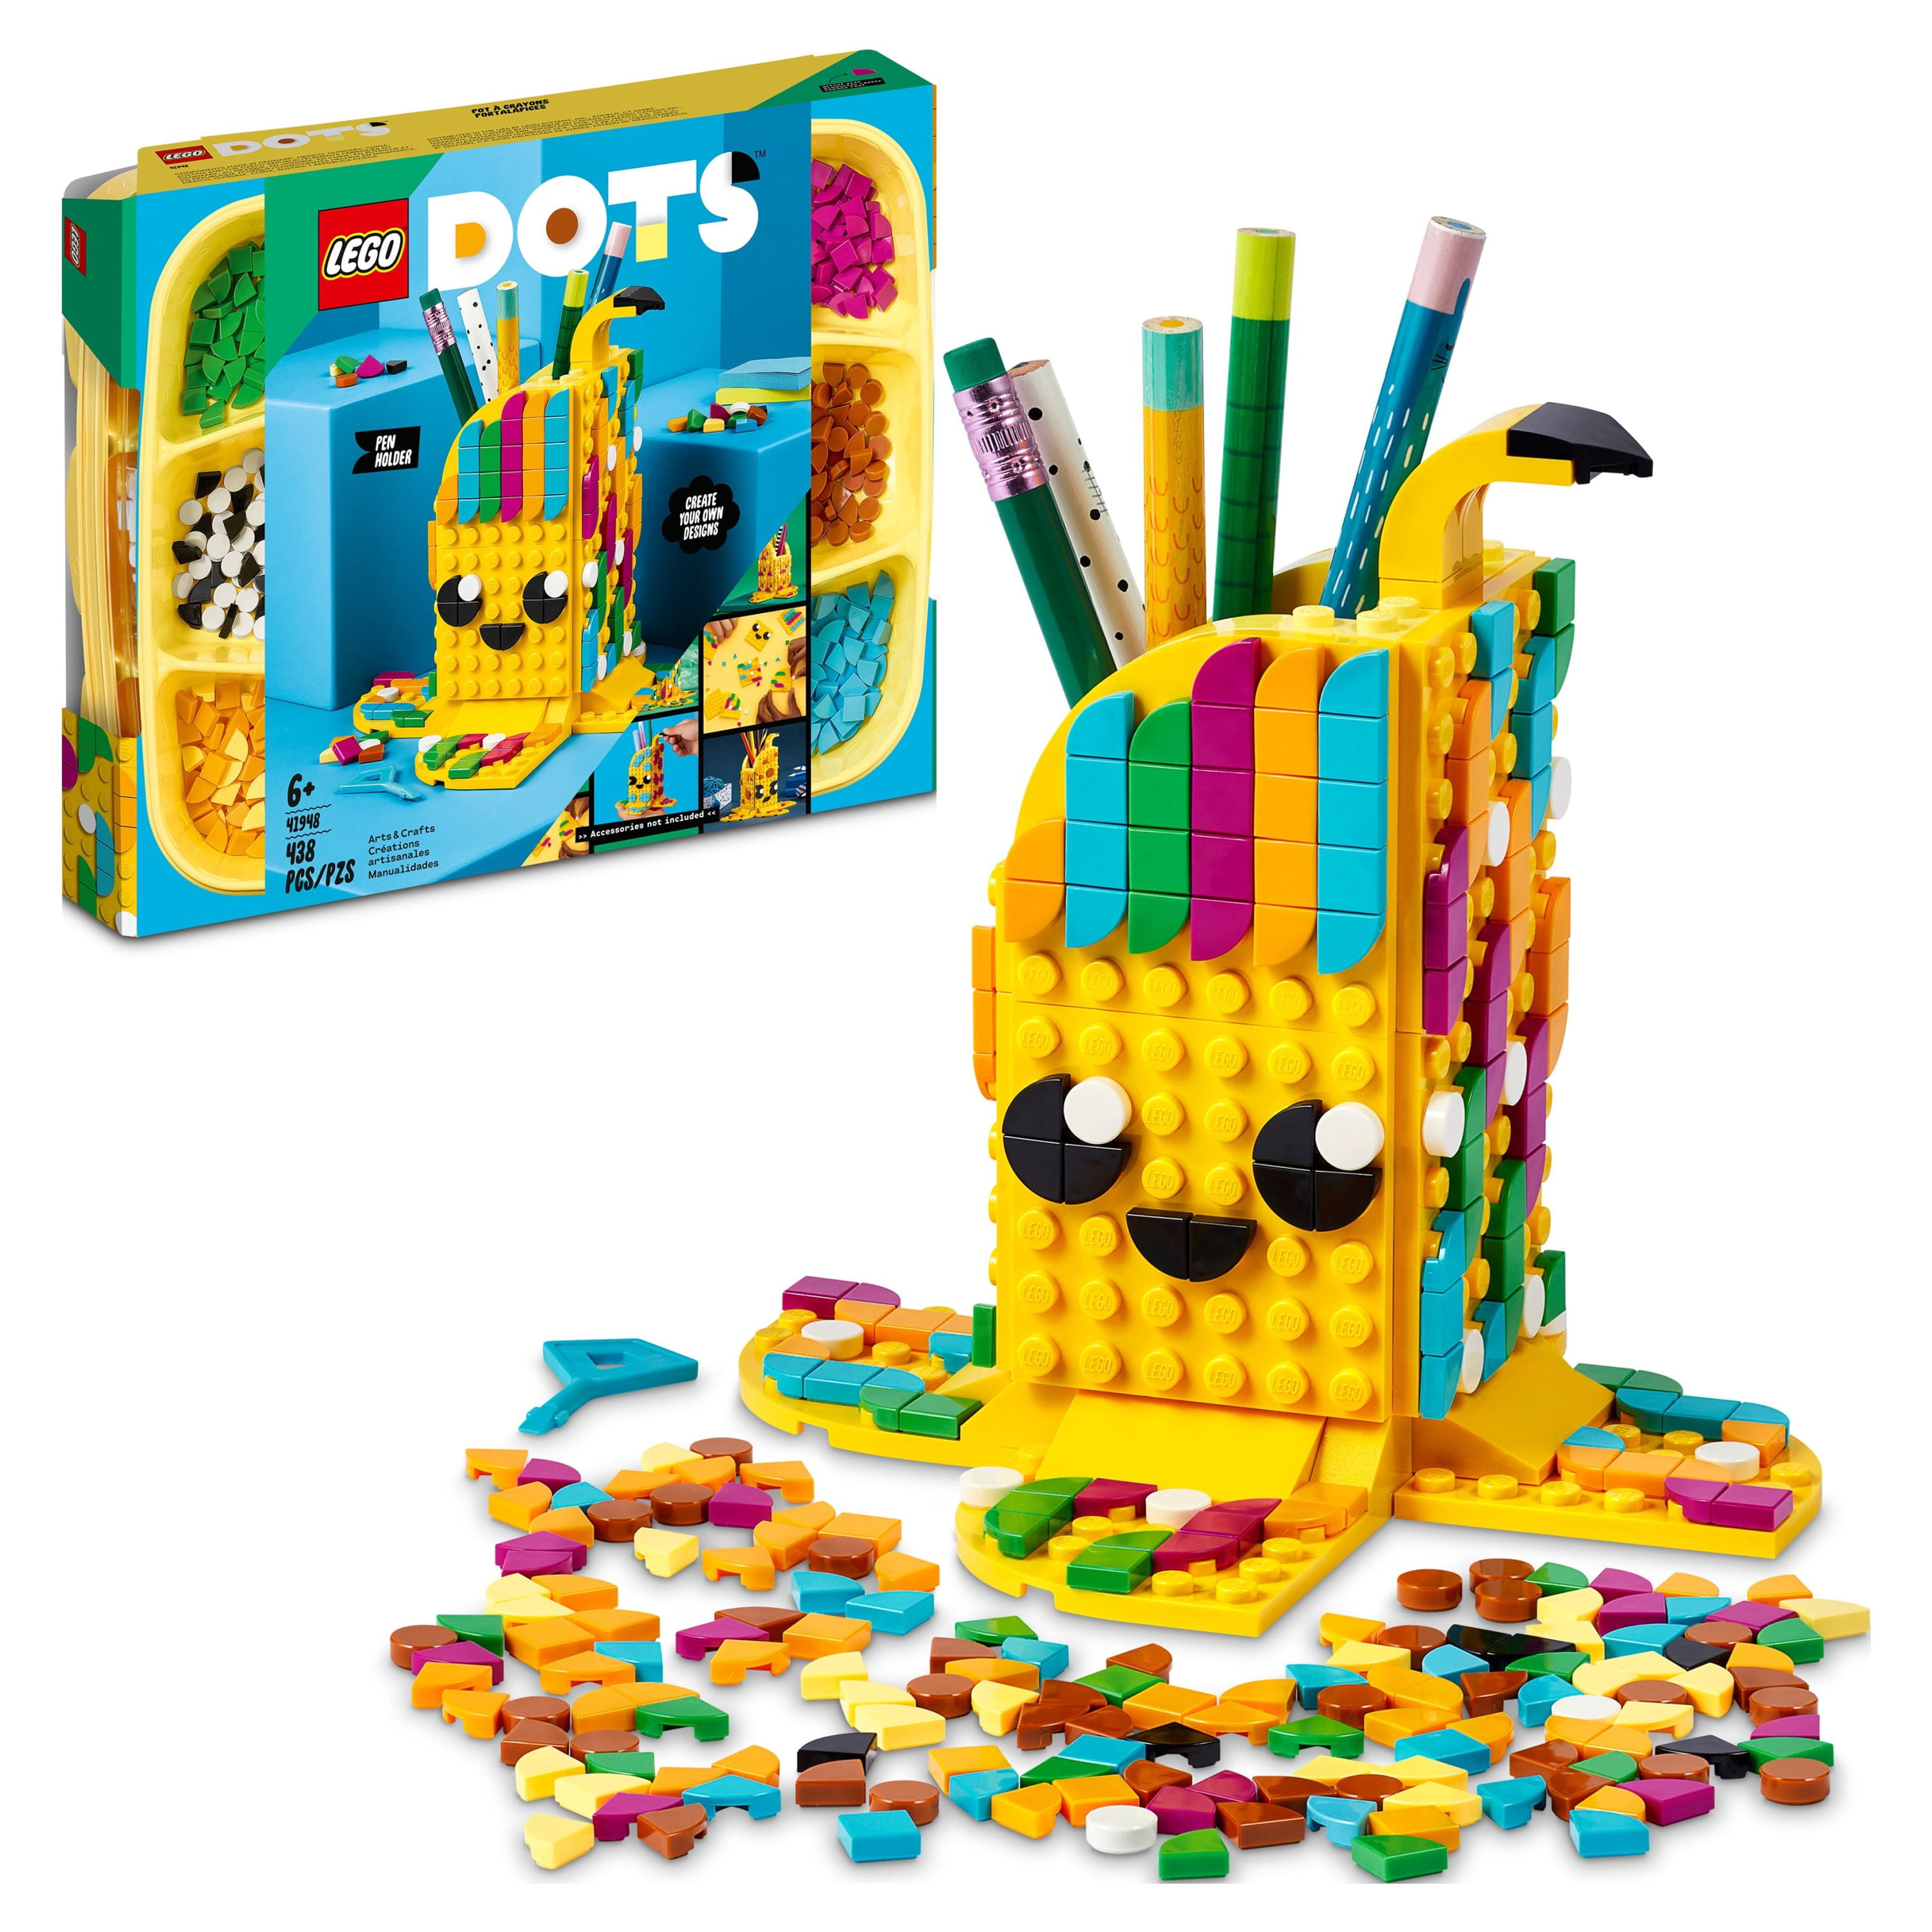 LEGO 41948 DOTS Cute Banana Pen Holder, Arts and Crafts Set, Toy Pencil Pot  Desk Organizer, DIY Bedroom Accessories, Gifts for Kids, Girls & Boys 6